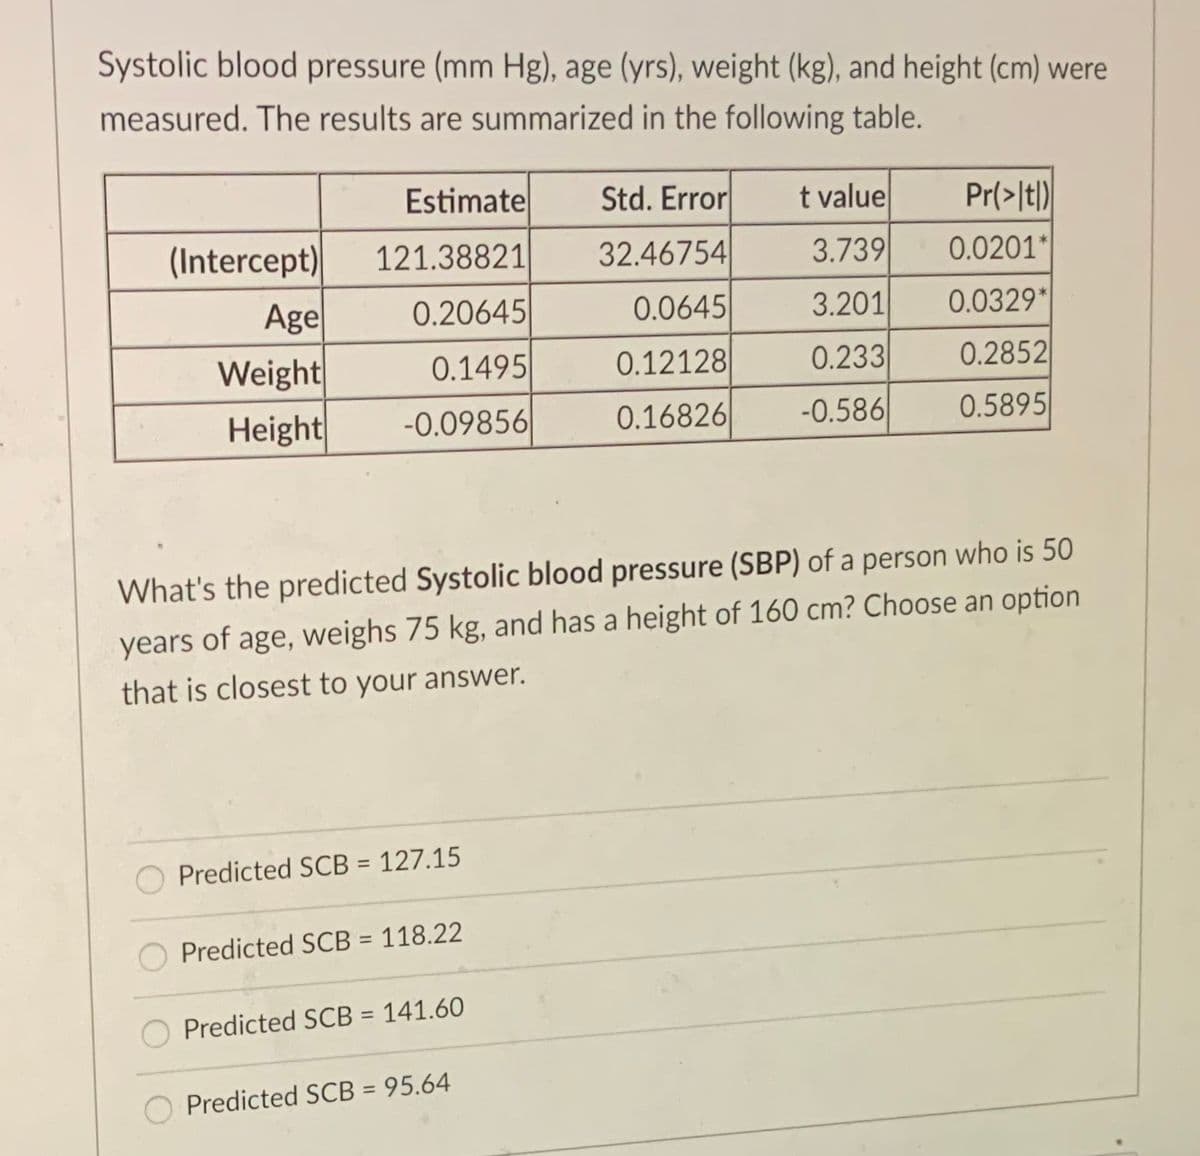 Systolic blood pressure (mm Hg), age (yrs), weight (kg), and height (cm) were
measured. The results are summarized in the following table.
Estimate
Std. Error
t value
Pr(>lt|)
(Intercept)
121.38821
32.46754
3.739
0.0201*
0.20645
0.0645
Age
Weight
Height
3.201
0.0329*
0.1495
0.12128
0.233
0.2852
-0.09856|
0.16826
-0.586
0.5895
What's the predicted Systolic blood pressure (SBP) of a person who is 50
years of age, weighs 75 kg, and has a height of 160 cm? Choose an option
that is closest to your answer.
Predicted SCB = 127.15
Predicted SCB = 118.22
Predicted SCB = 141.60
Predicted SCB = 95.64
